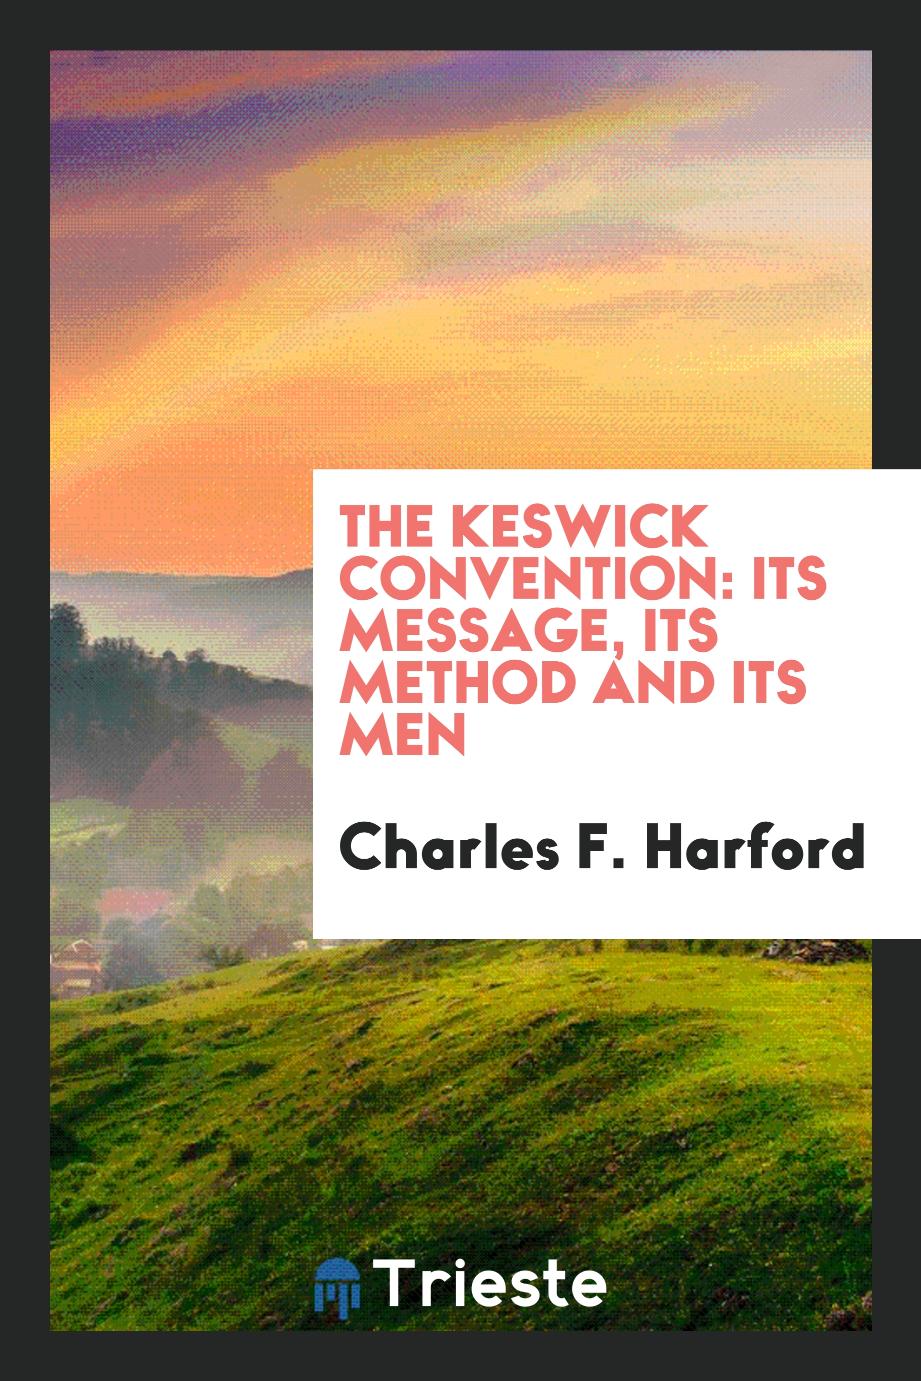 The Keswick convention: its message, its method and its men